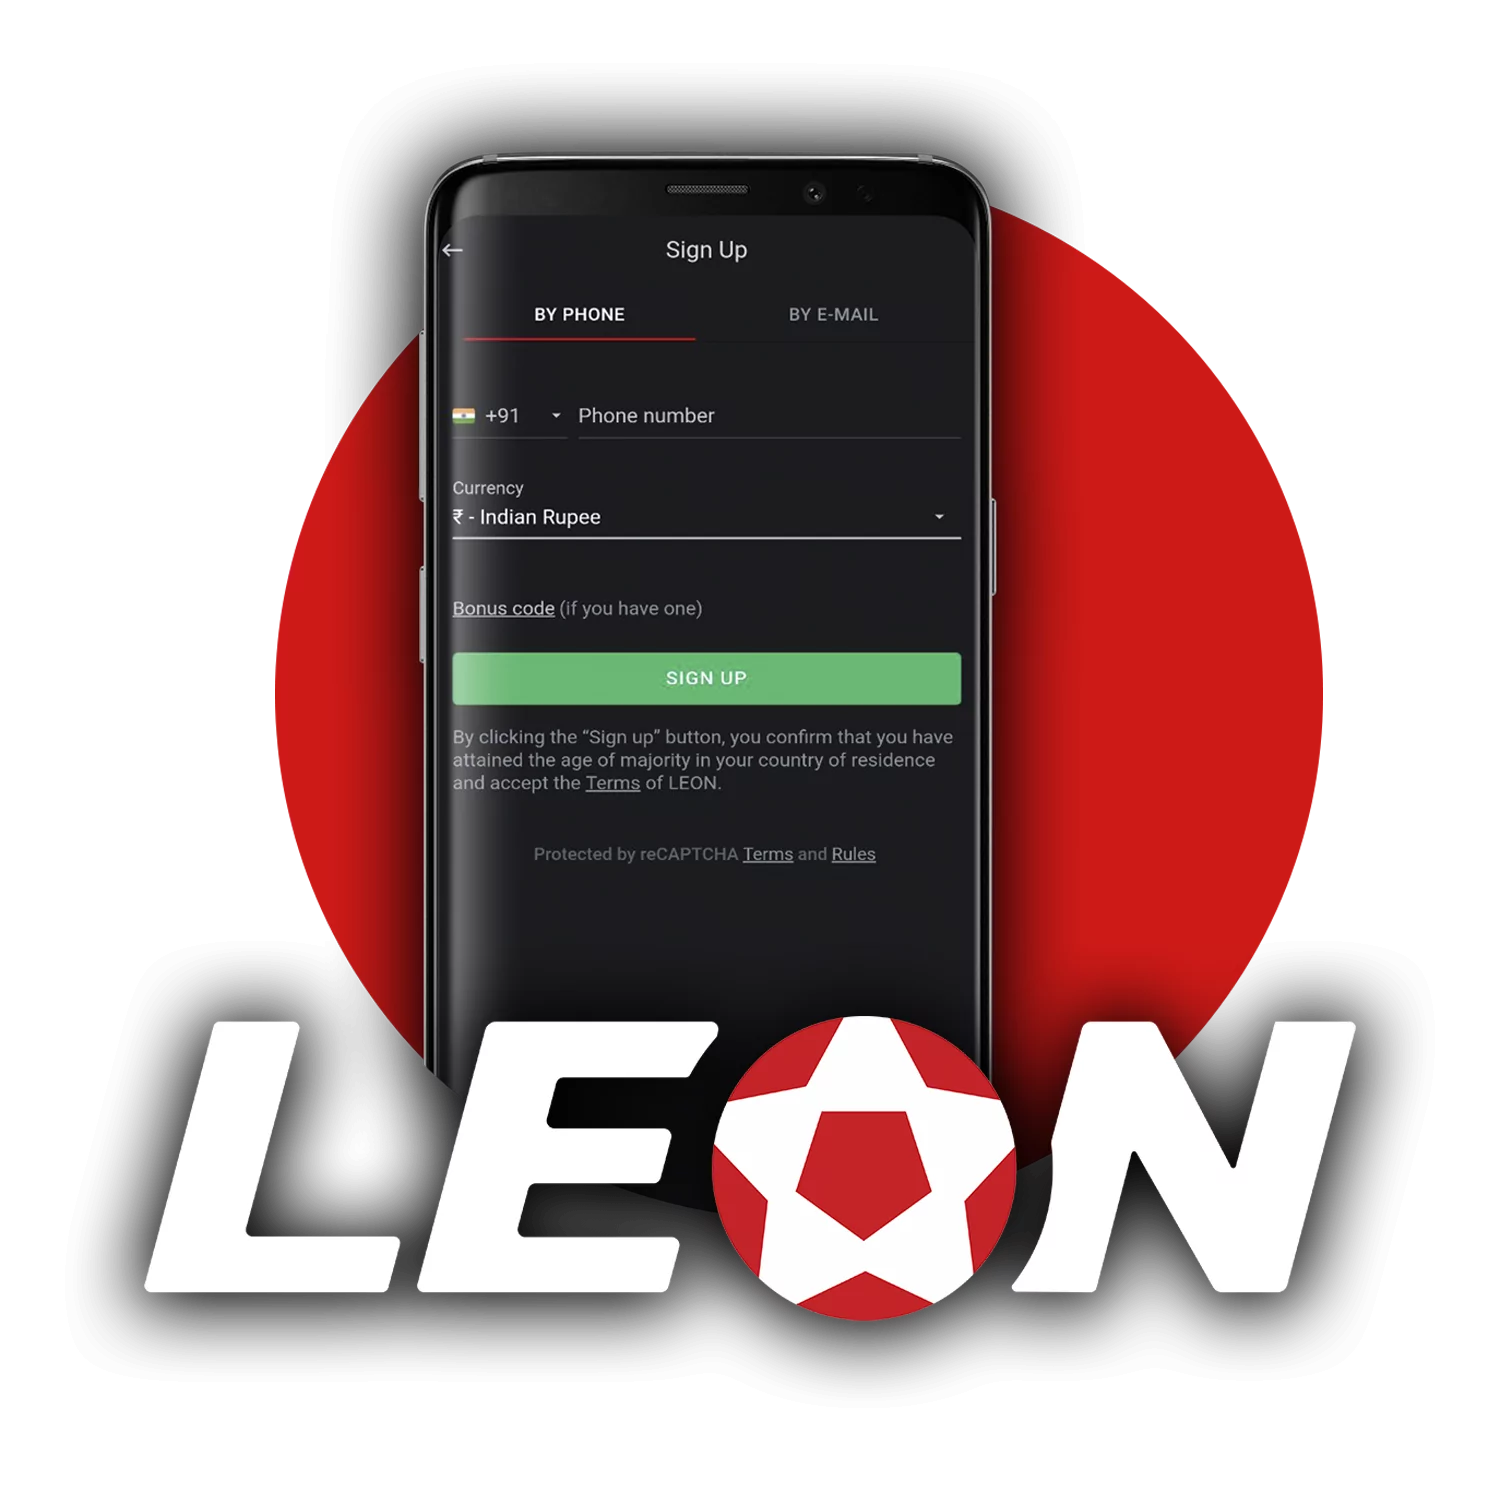 Sign up for Leon to get an access to betting options.